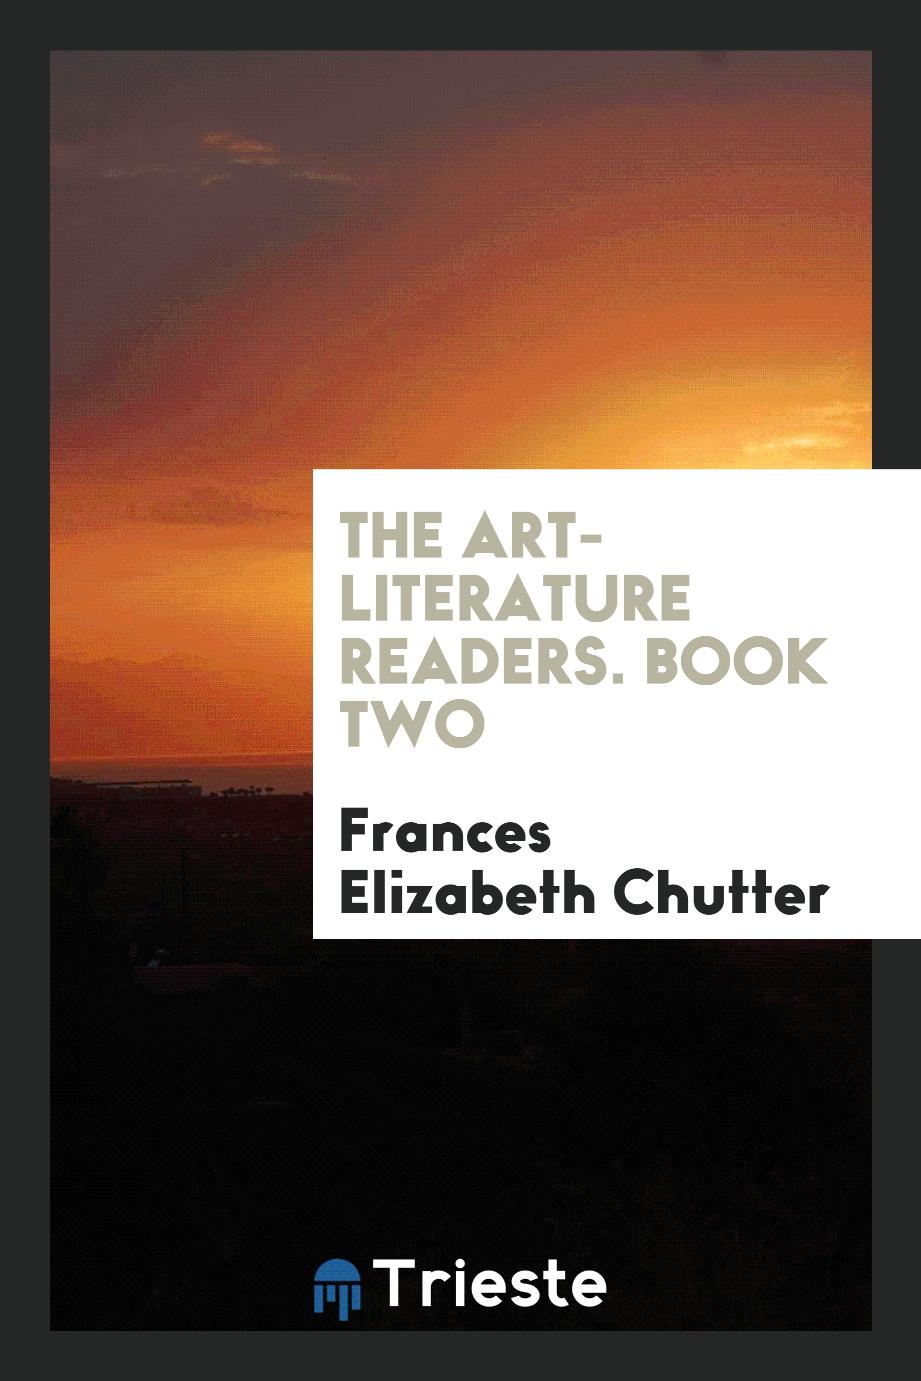 The Art-Literature Readers. Book Two